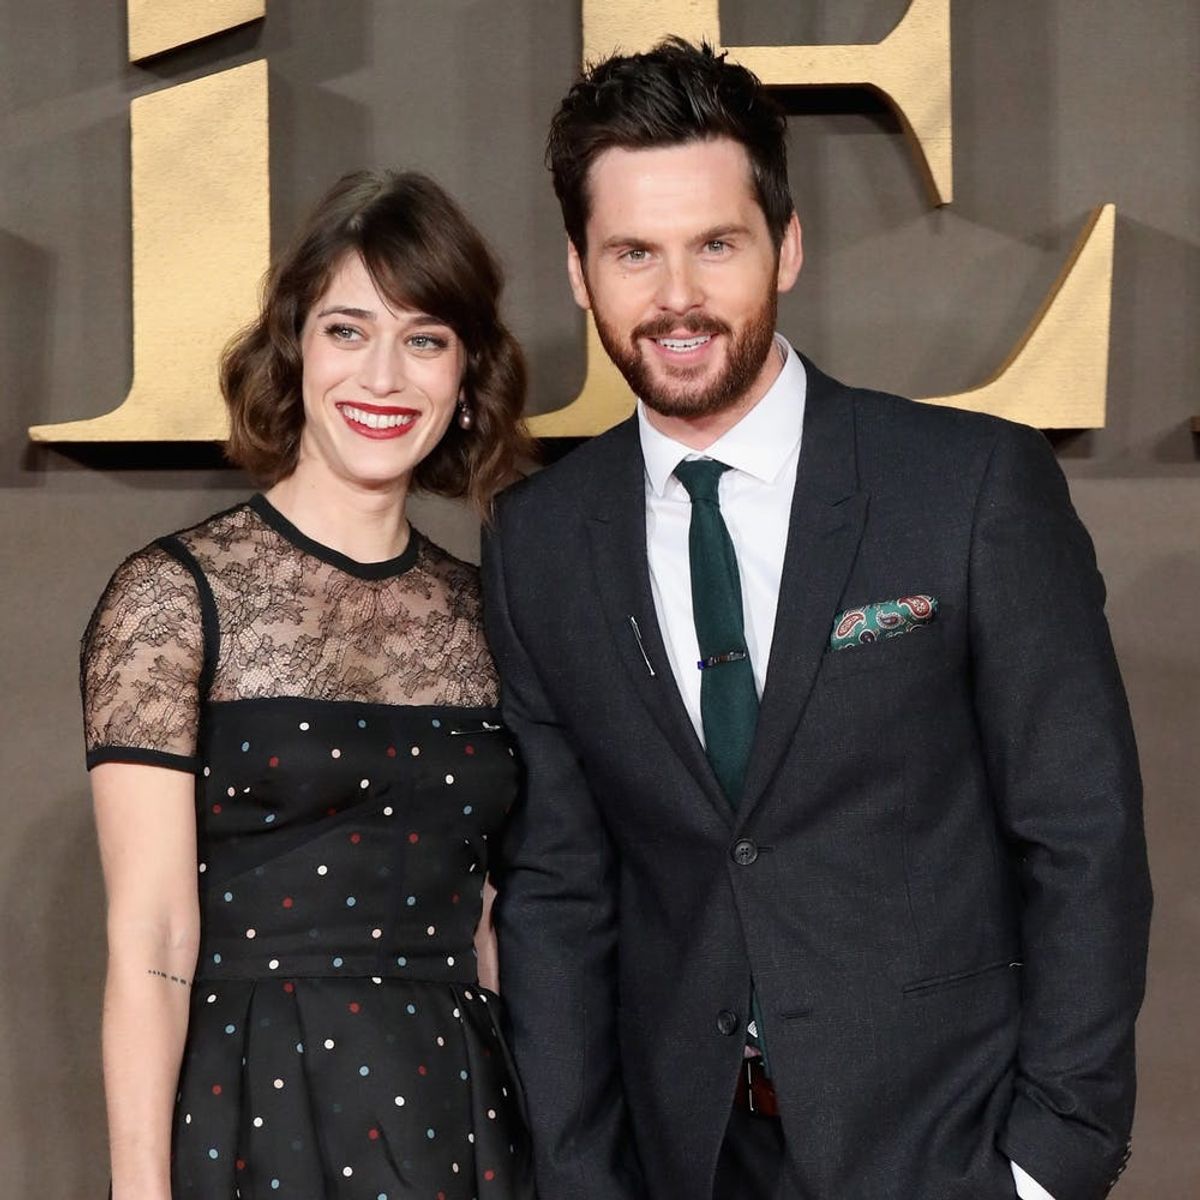 “Mean Girls” Star Lizzy Caplan Marries Tom Riley in a Dreamy Wedding in Italy